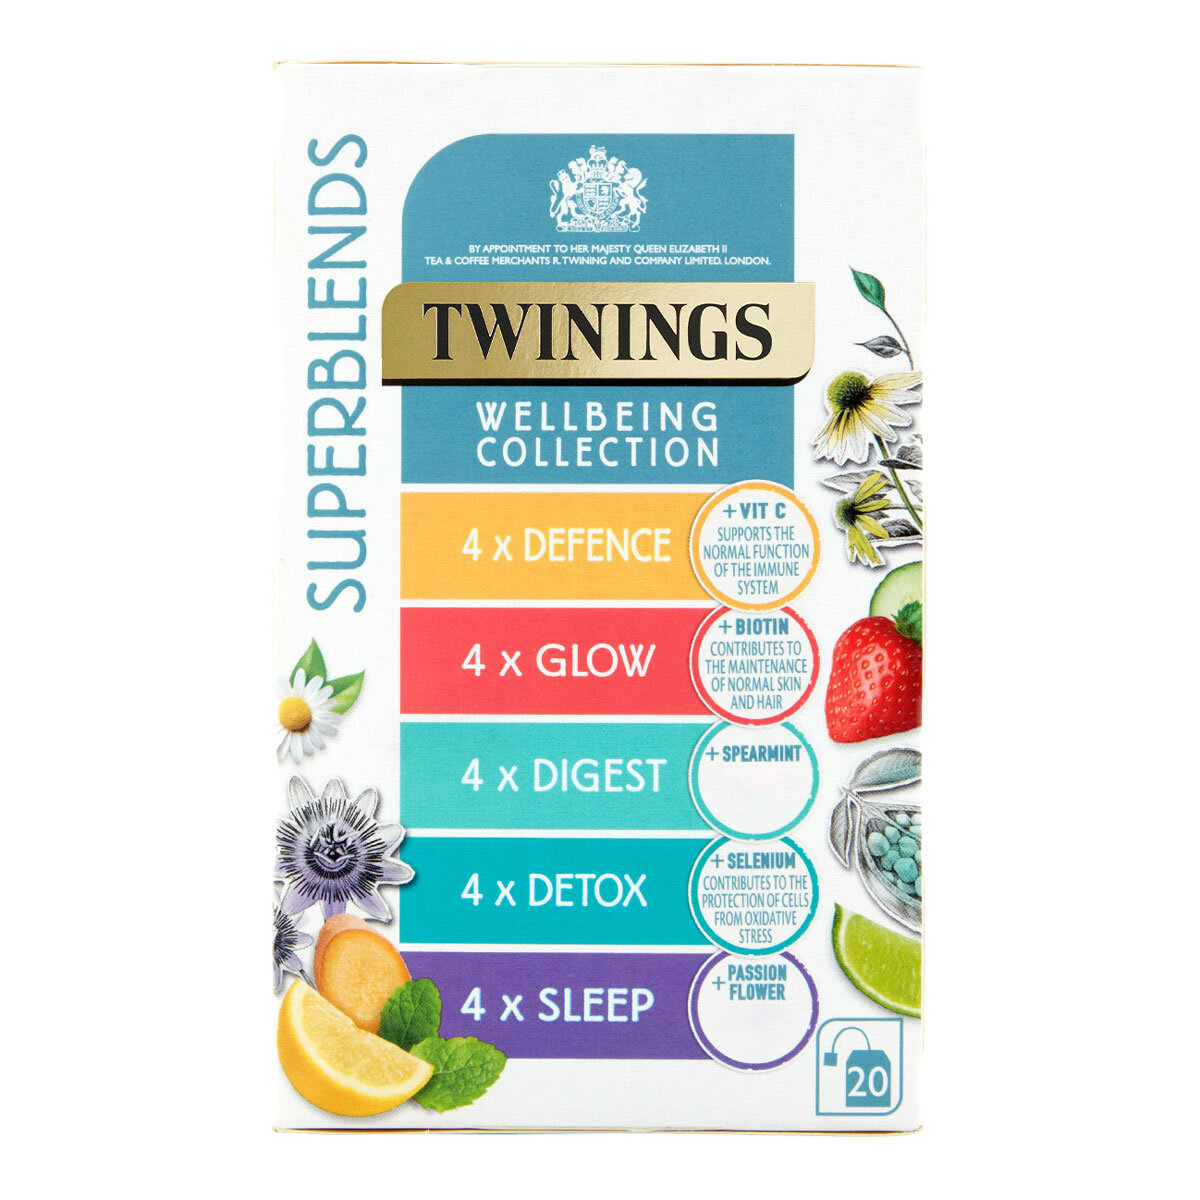 Twinings Wellbeing Collection Tea Bags, 20 Pack